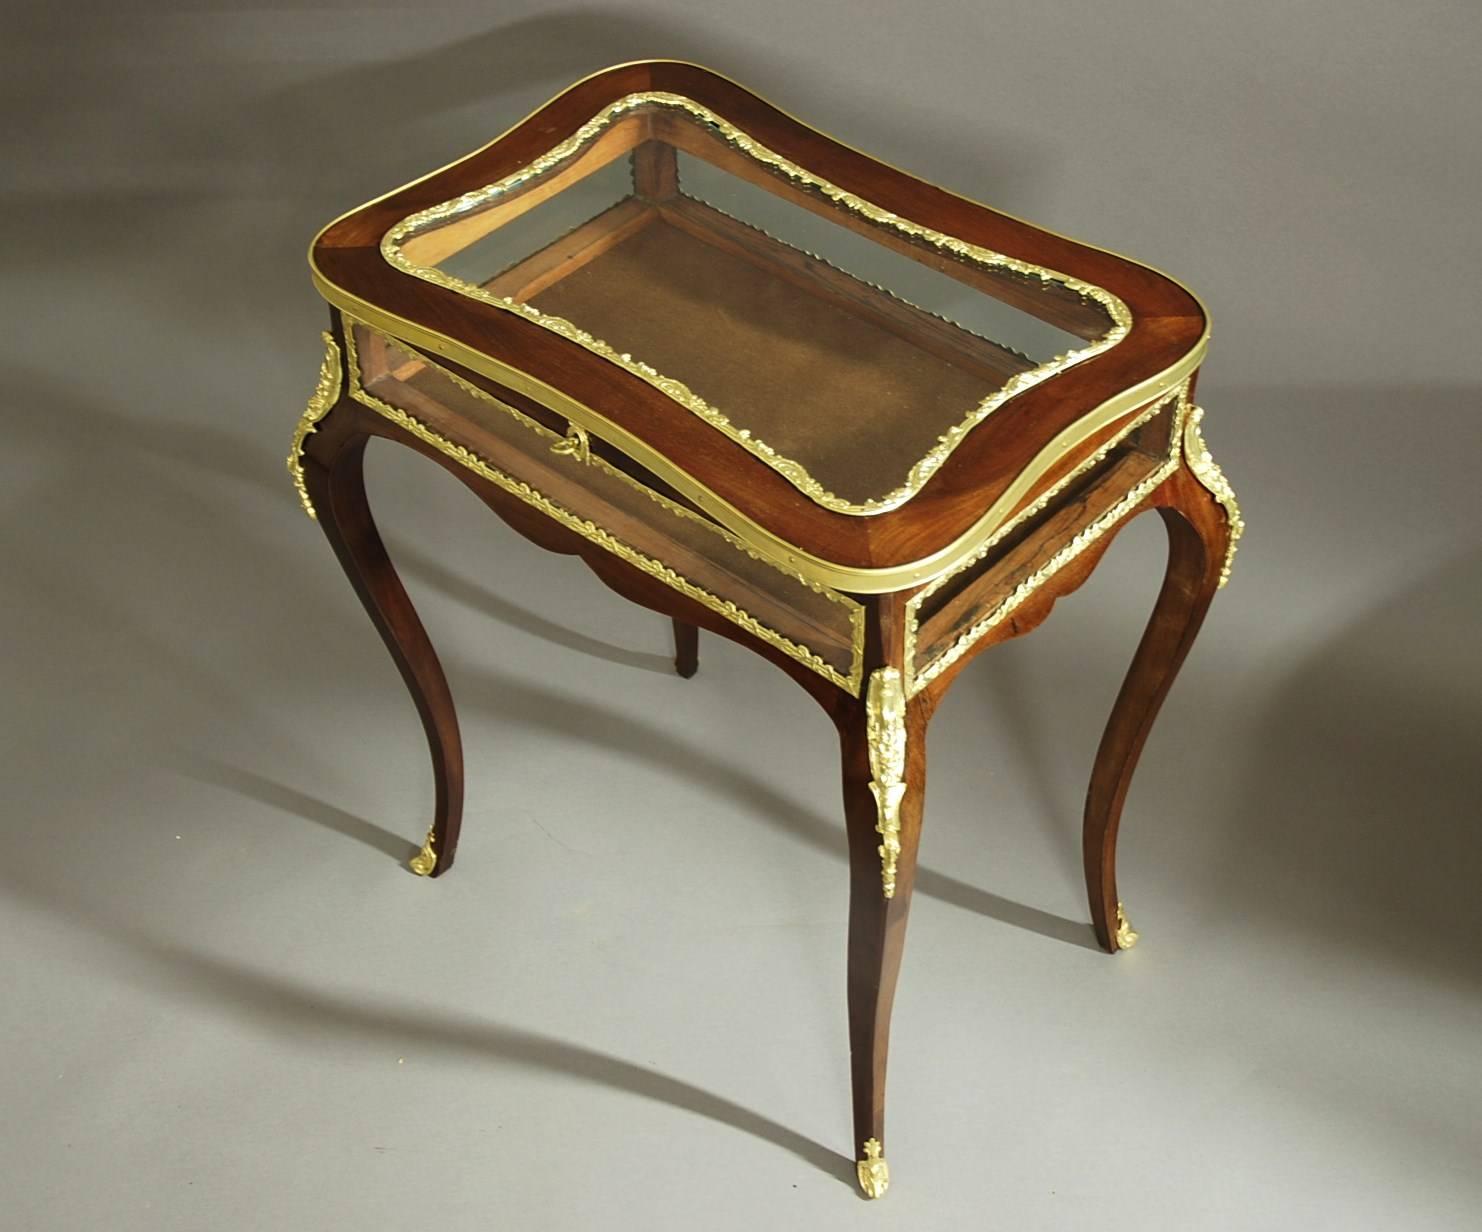 Ormolu French, 19th Century Mahogany Freestanding Bijouterie Table of Small Proportions